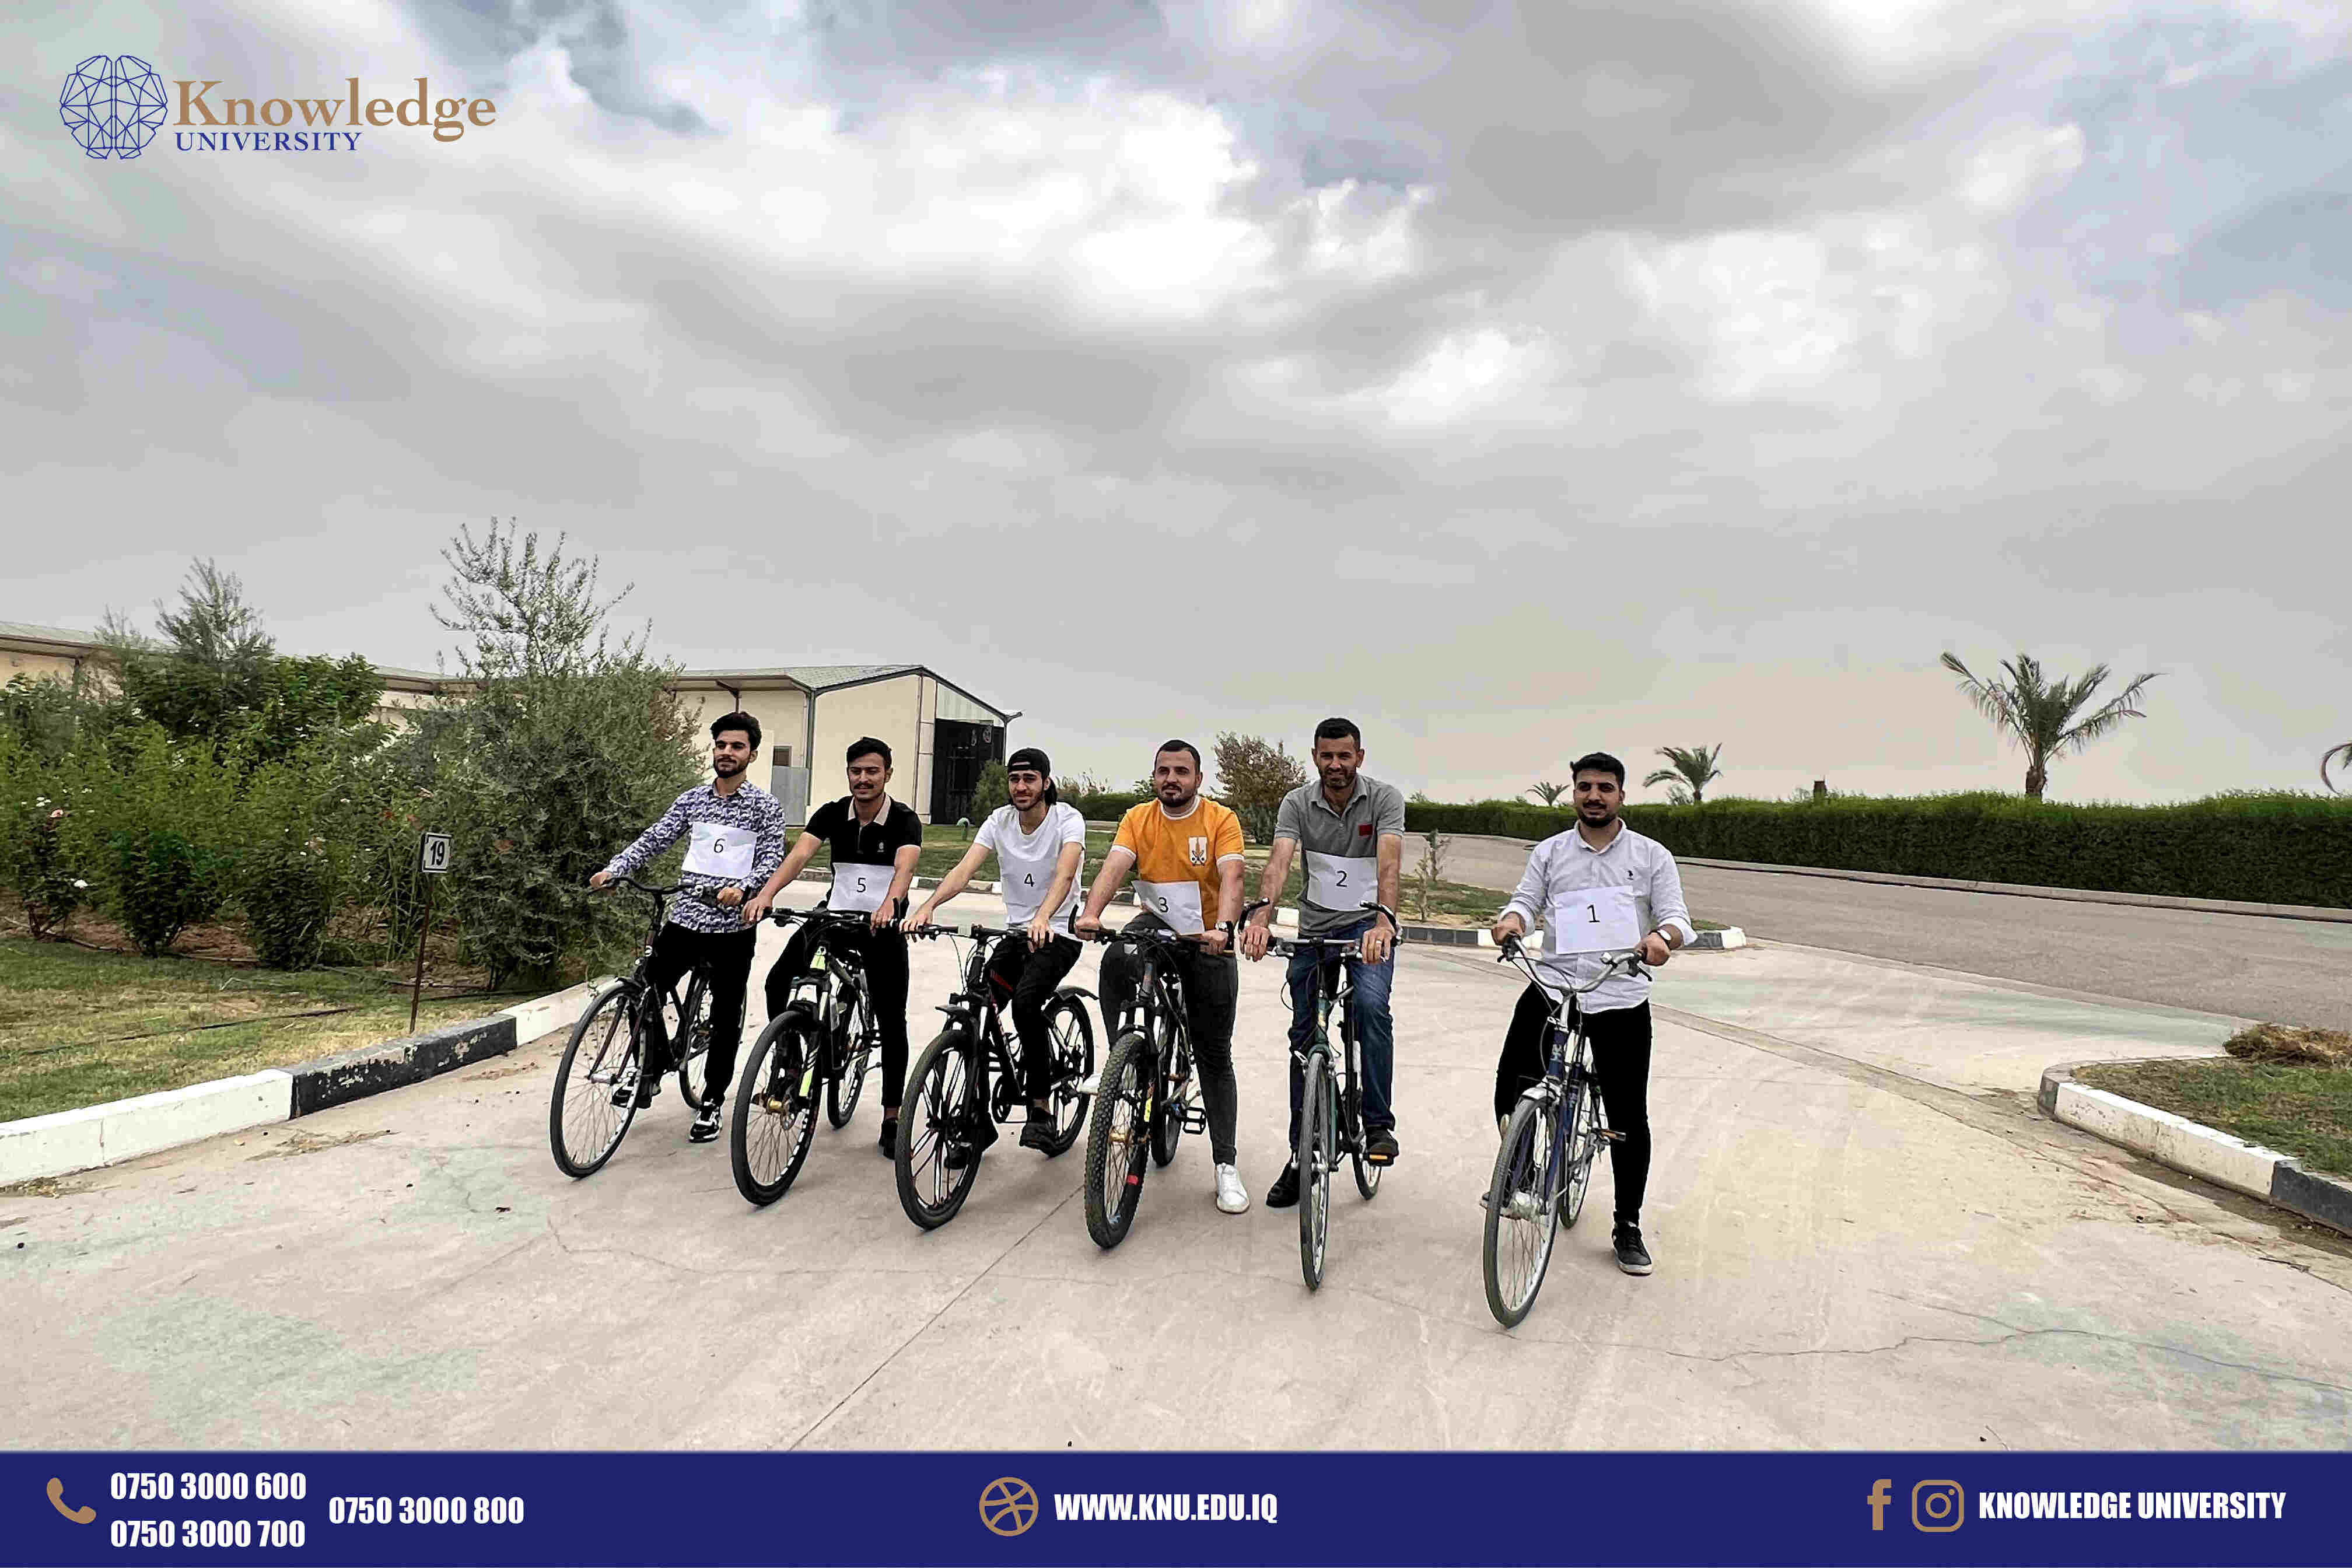 Department of Petroleum Engineering Hosts Exciting Bicycle Riding Activity for Students